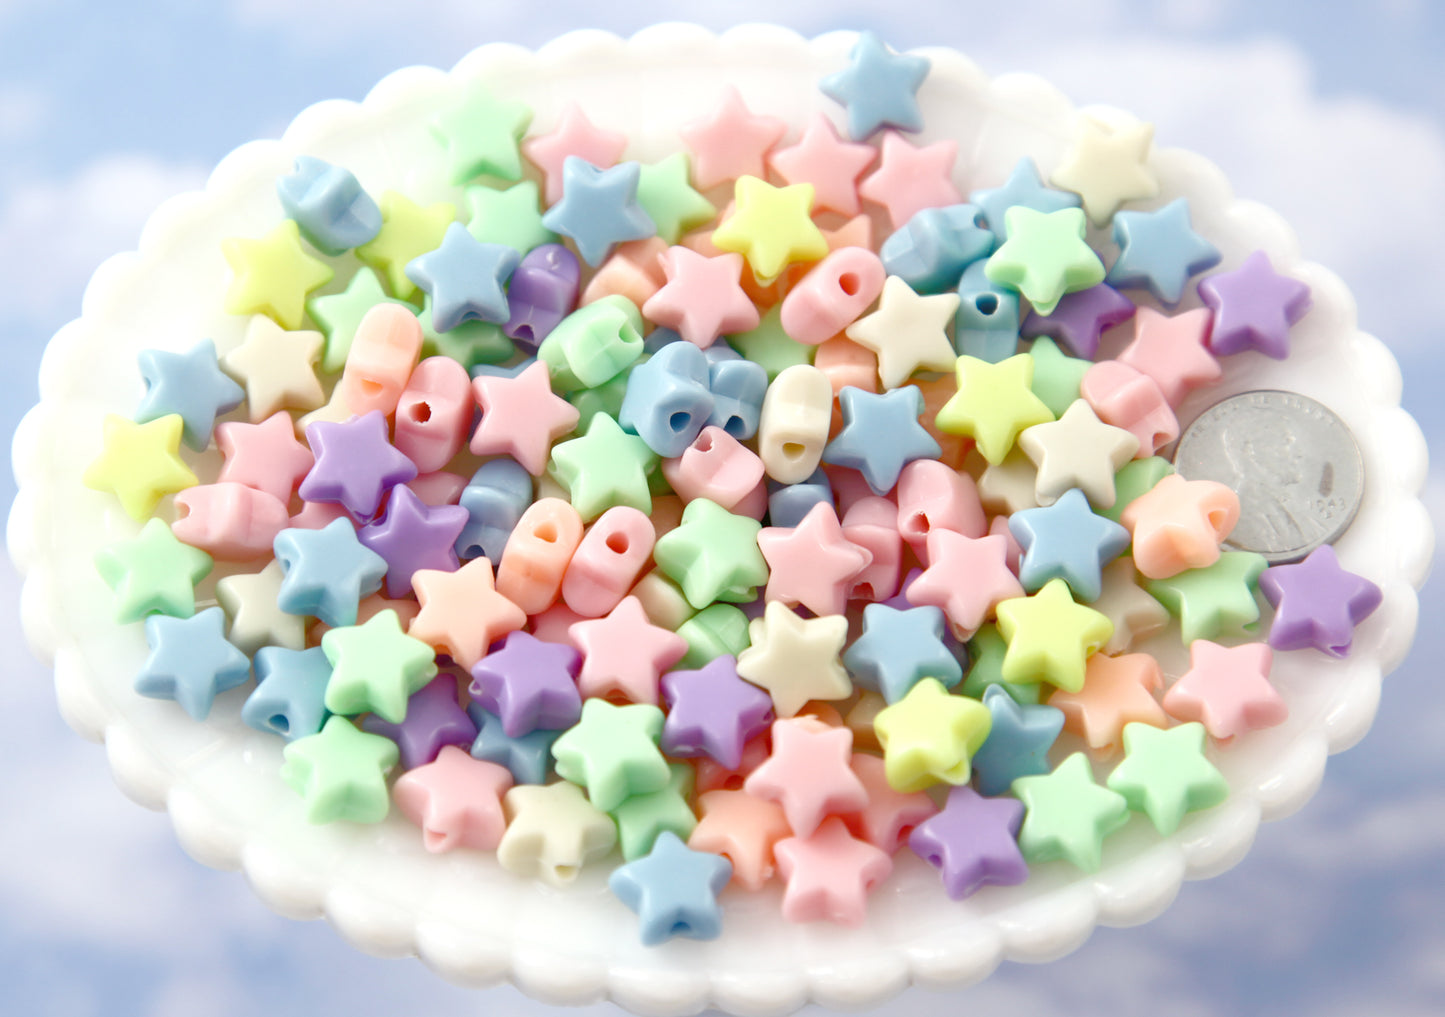 12mm Small Beautiful Bright 3D Rounded Puffy Pastel Star Acrylic or Resin Beads - 100 pcs set